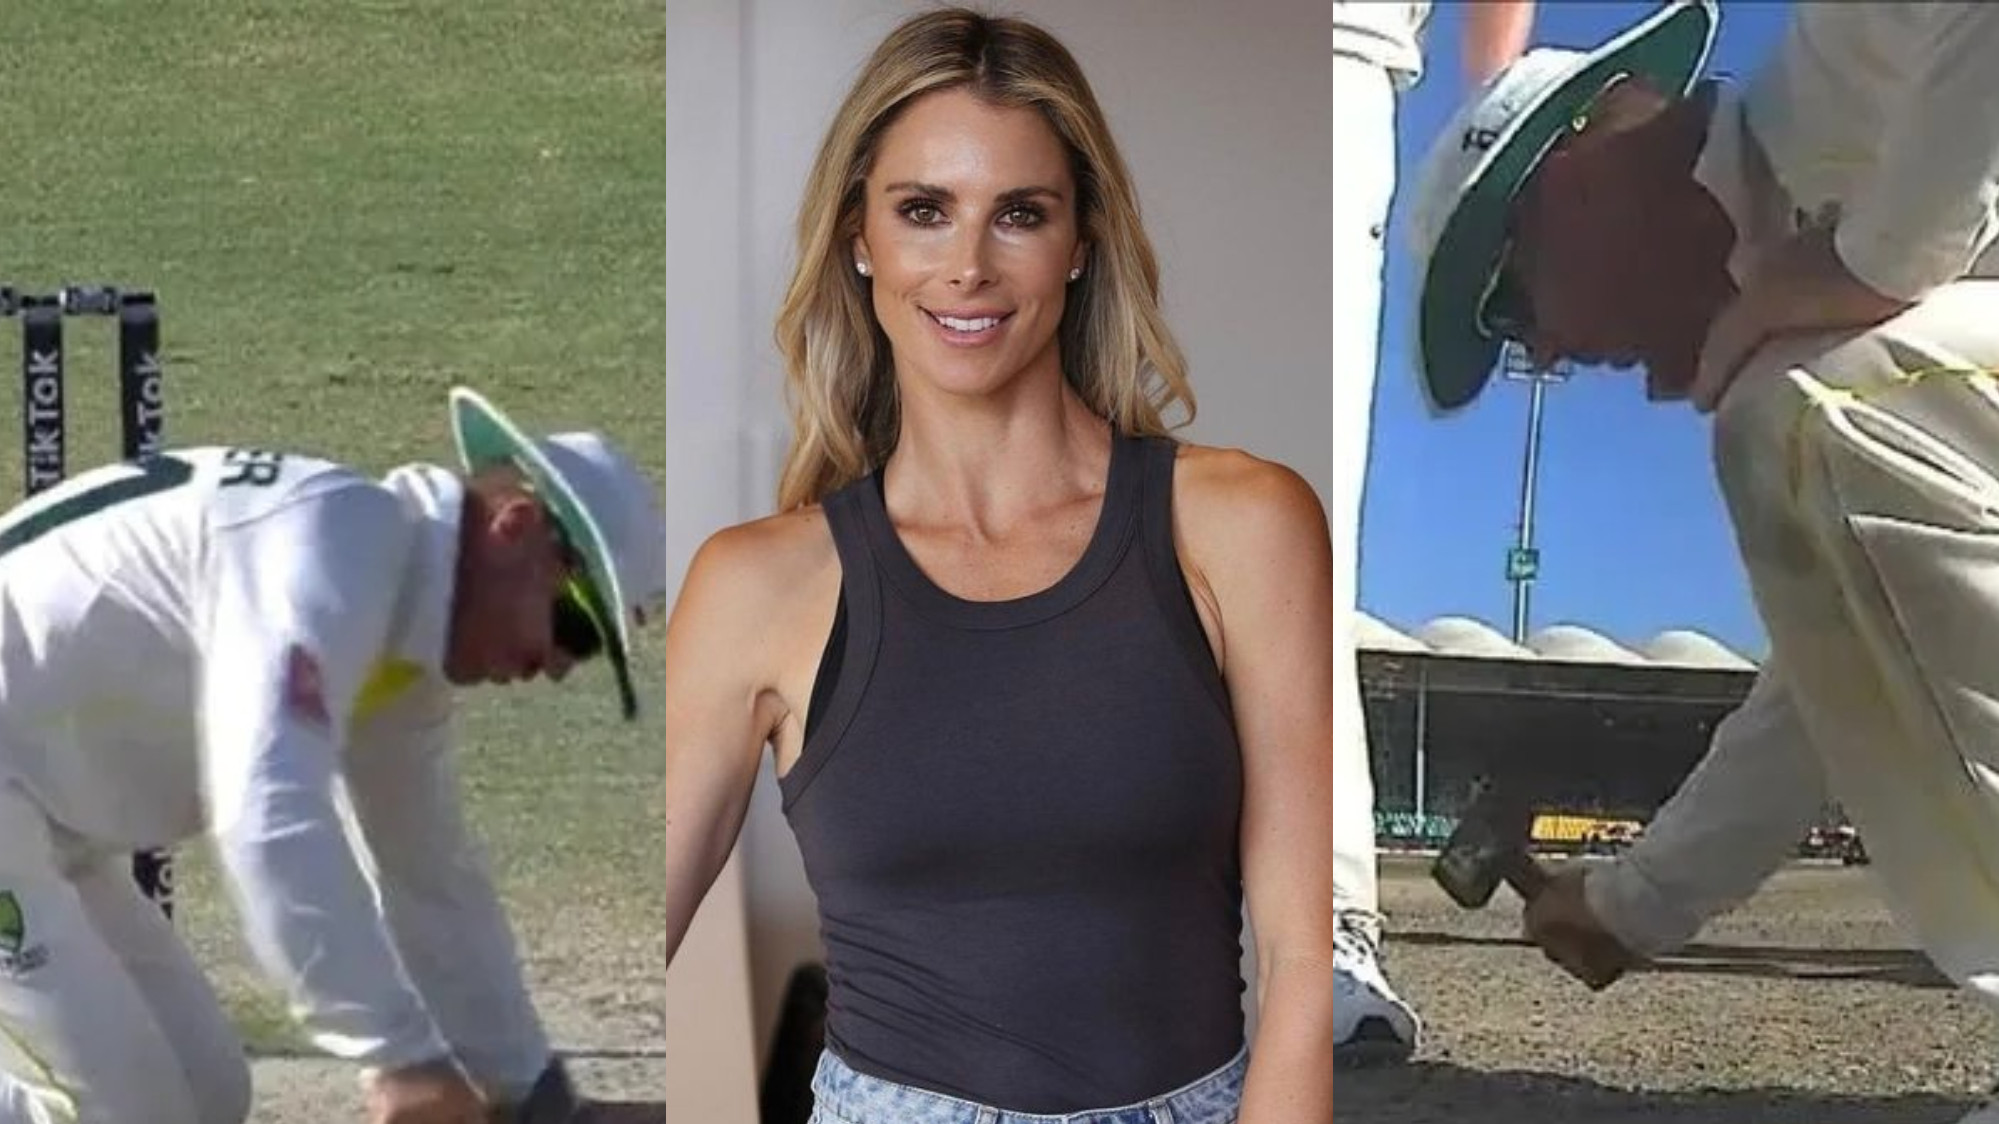 PAK v AUS 2022: WATCH- David Warner's wife Candice reminds him of house work as he tries to fix pitch using a hammer